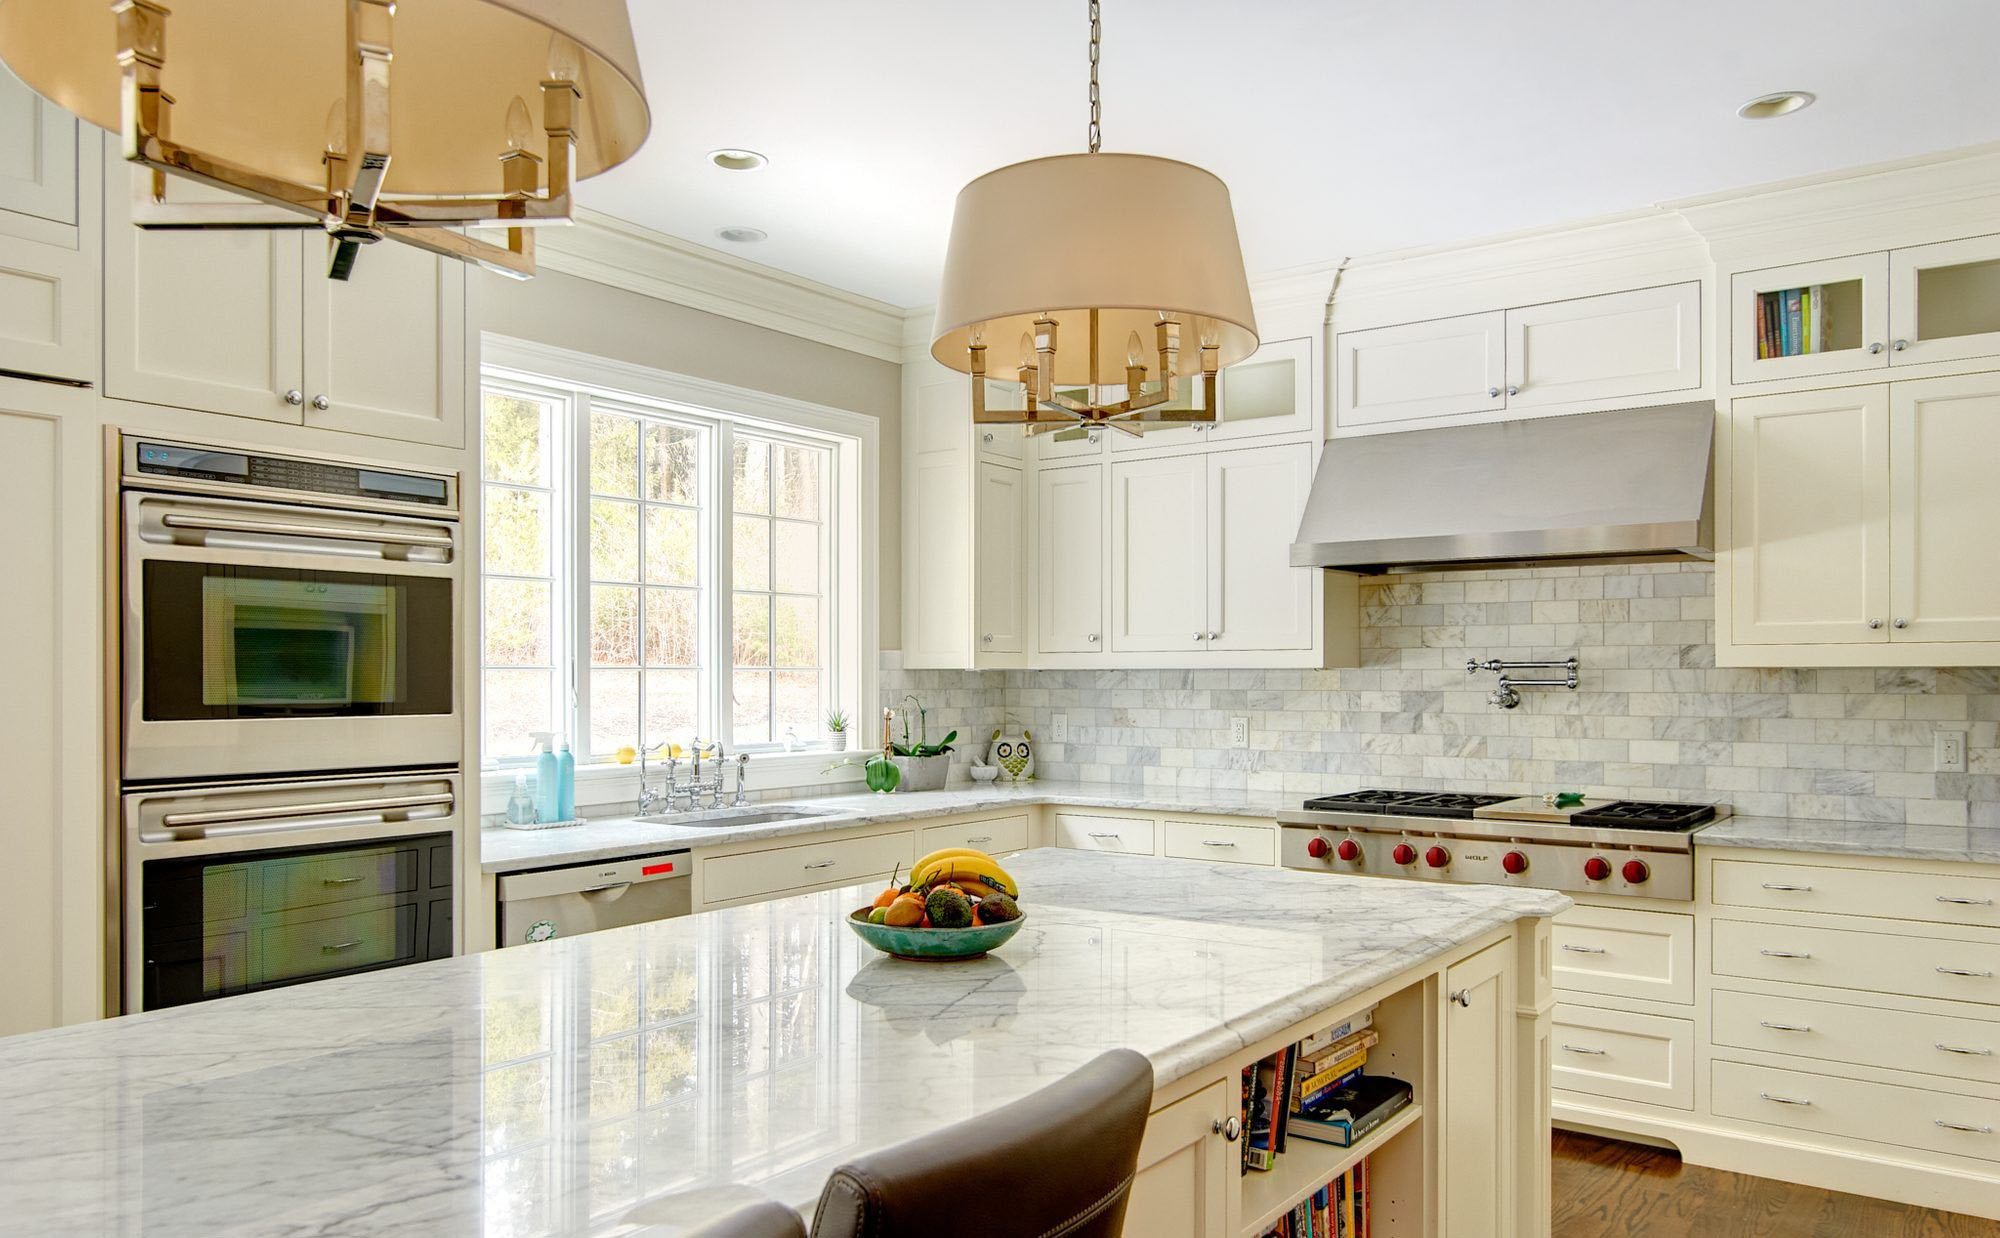 Cream kitchen cabinets with white marble countertops.